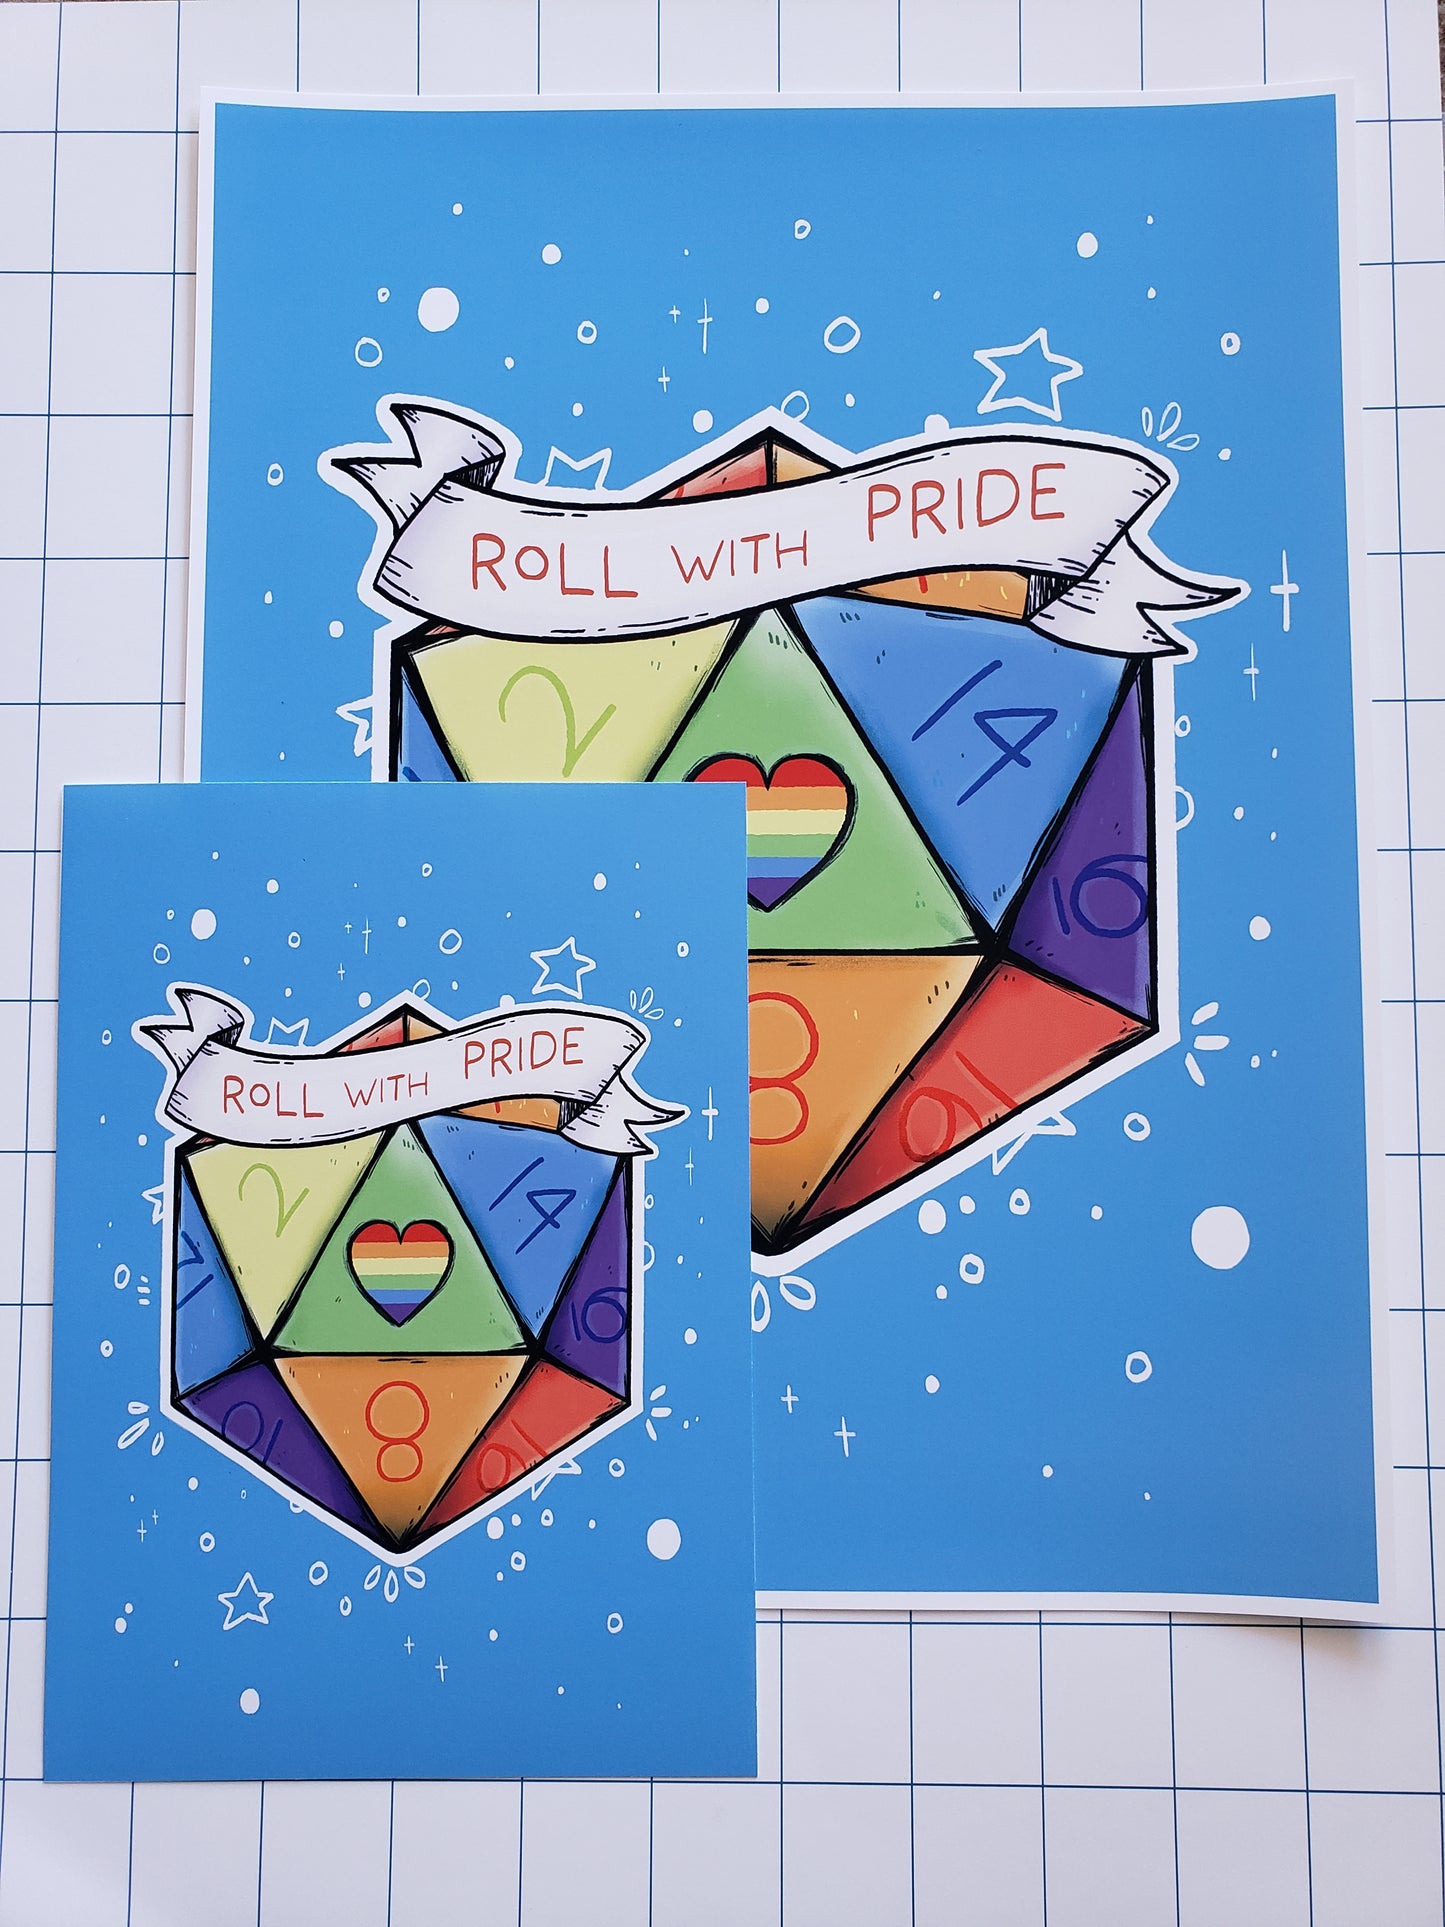 Roll with Pride D20 - Print